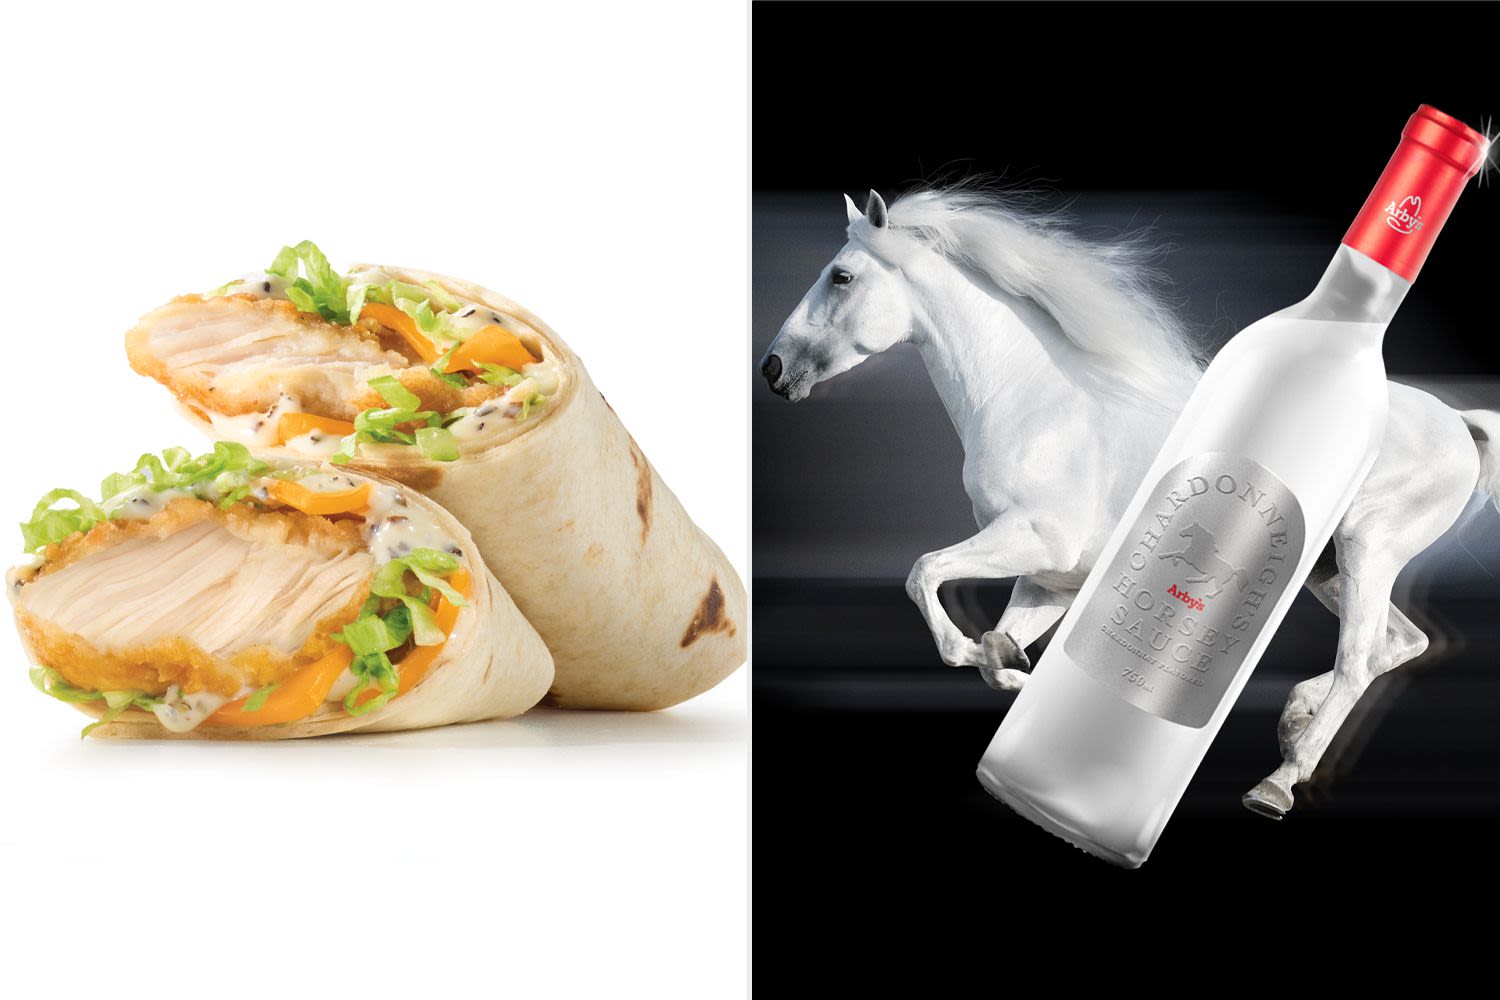 Arby’s New Menu Items Include a Beyoncé-Inspired ‘Horsey Sauce’